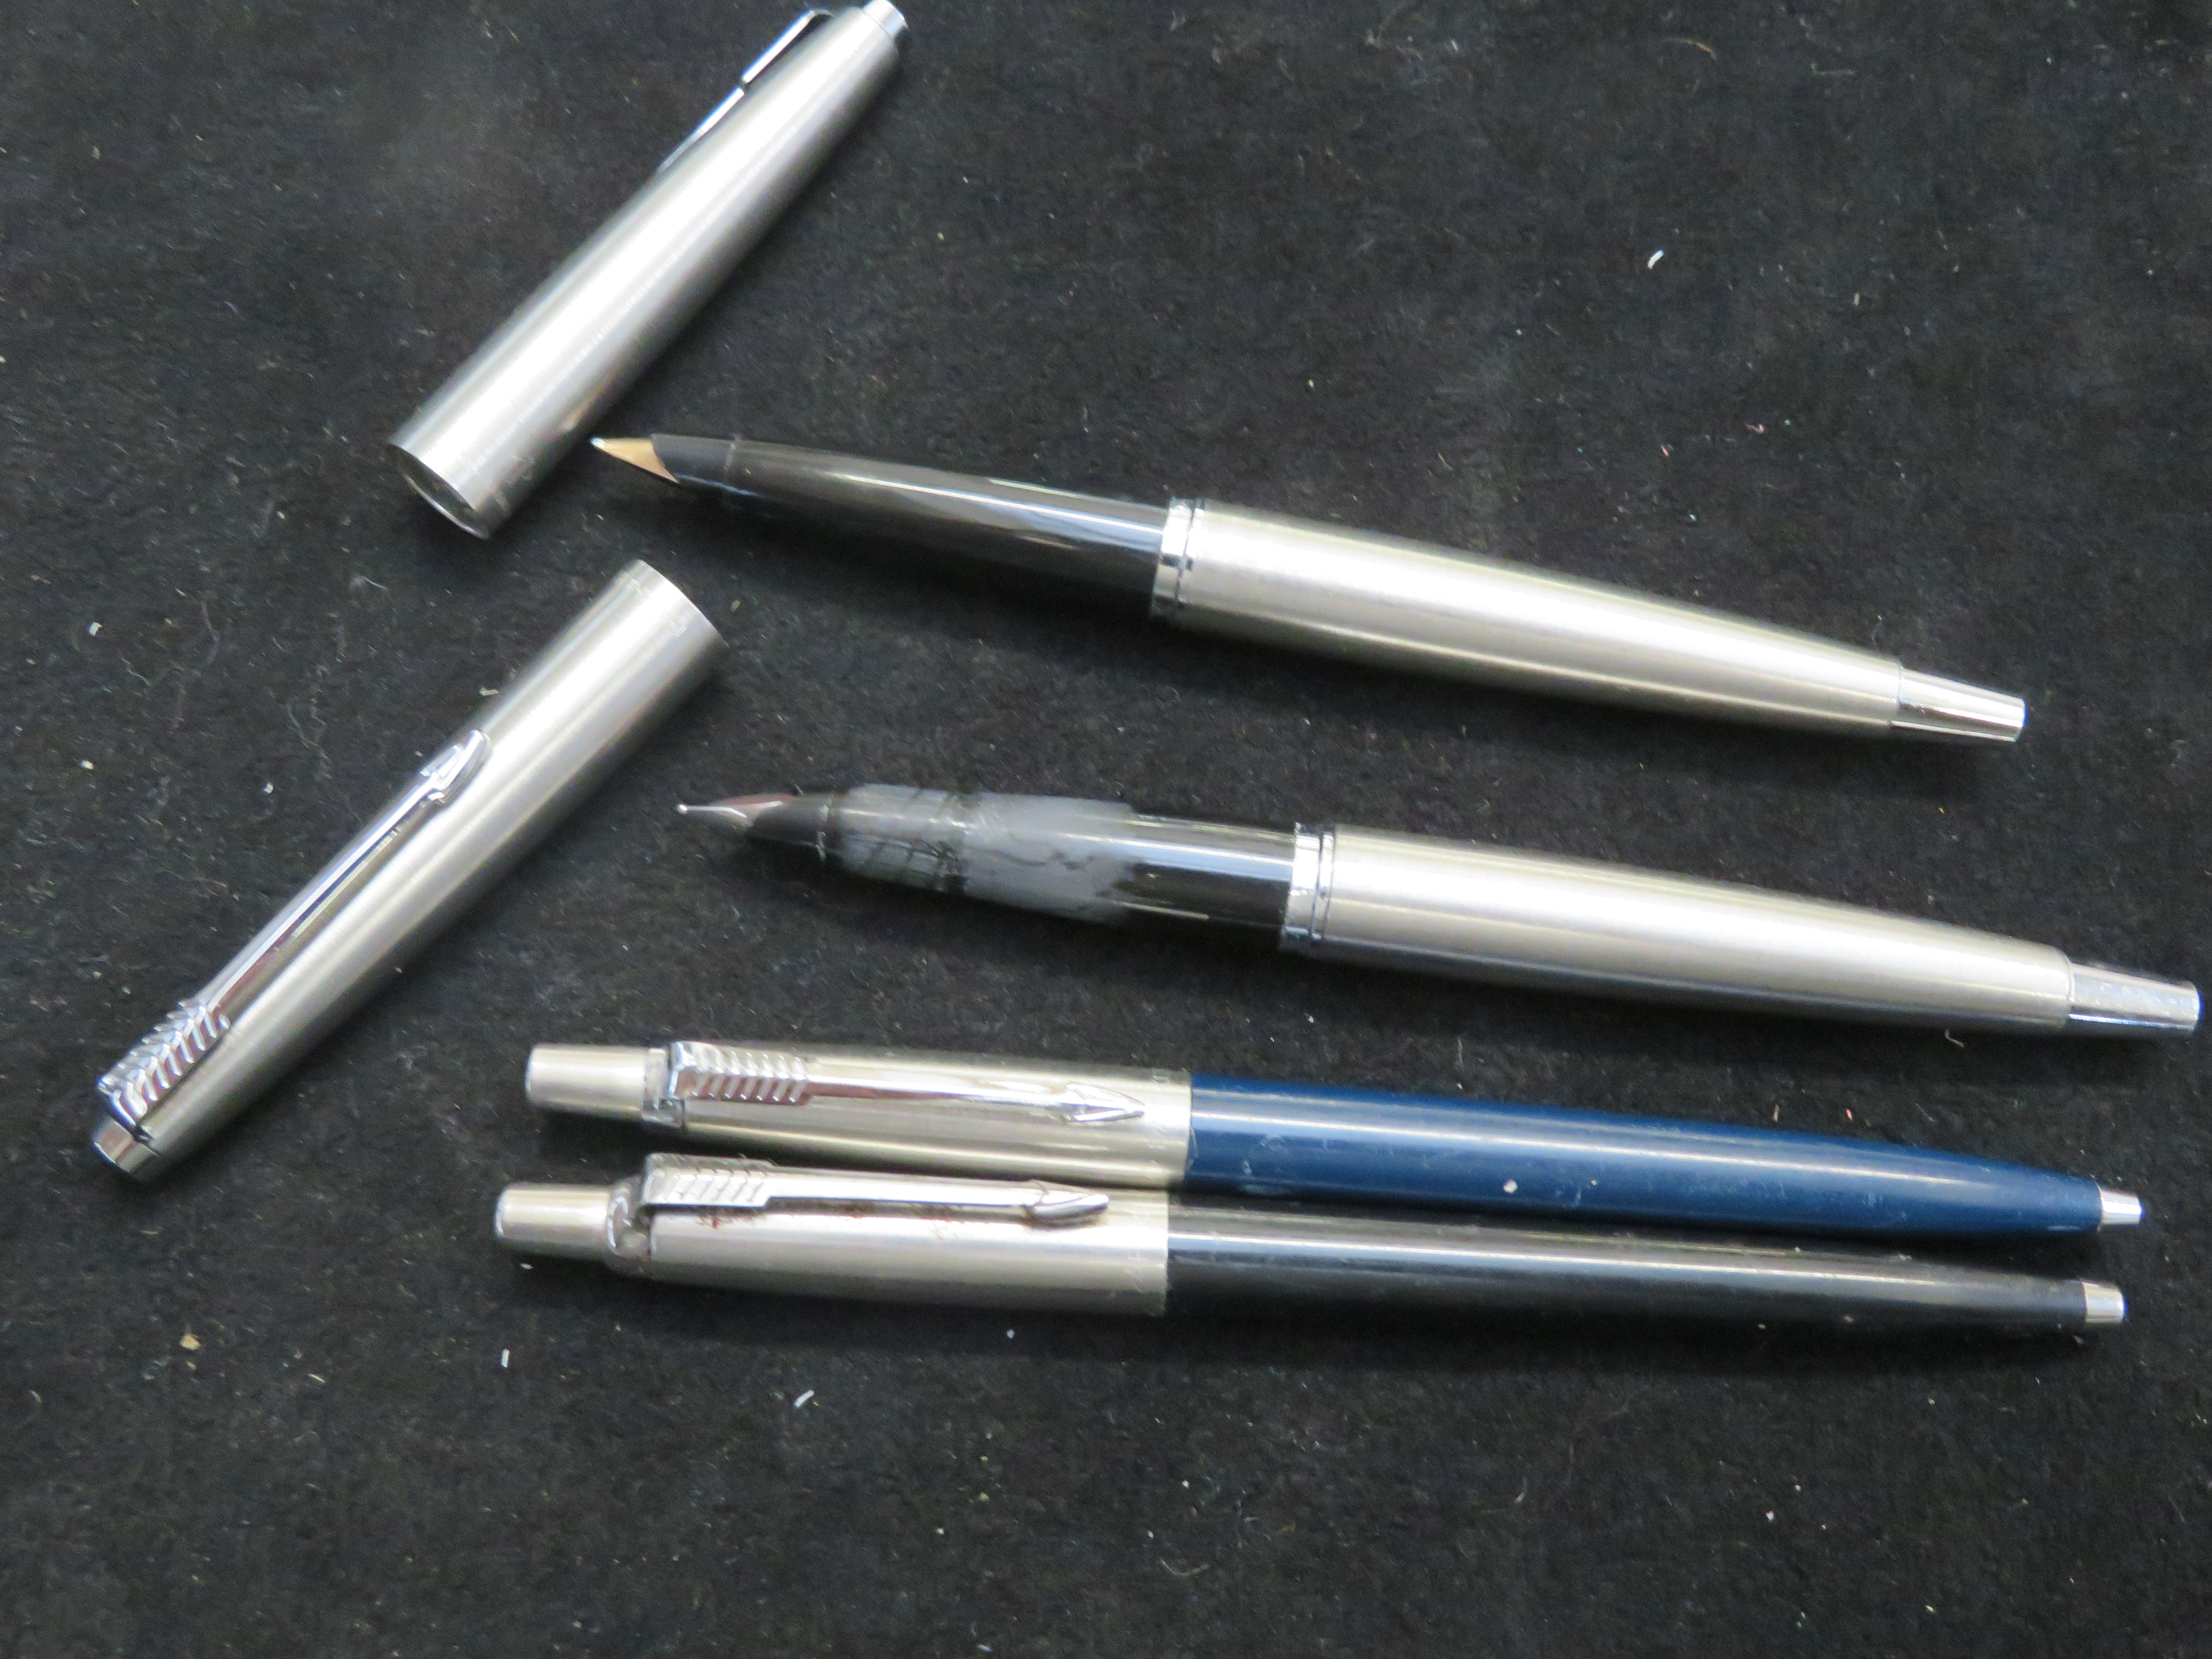 2 Parker fountain pens together with 2 parker ball